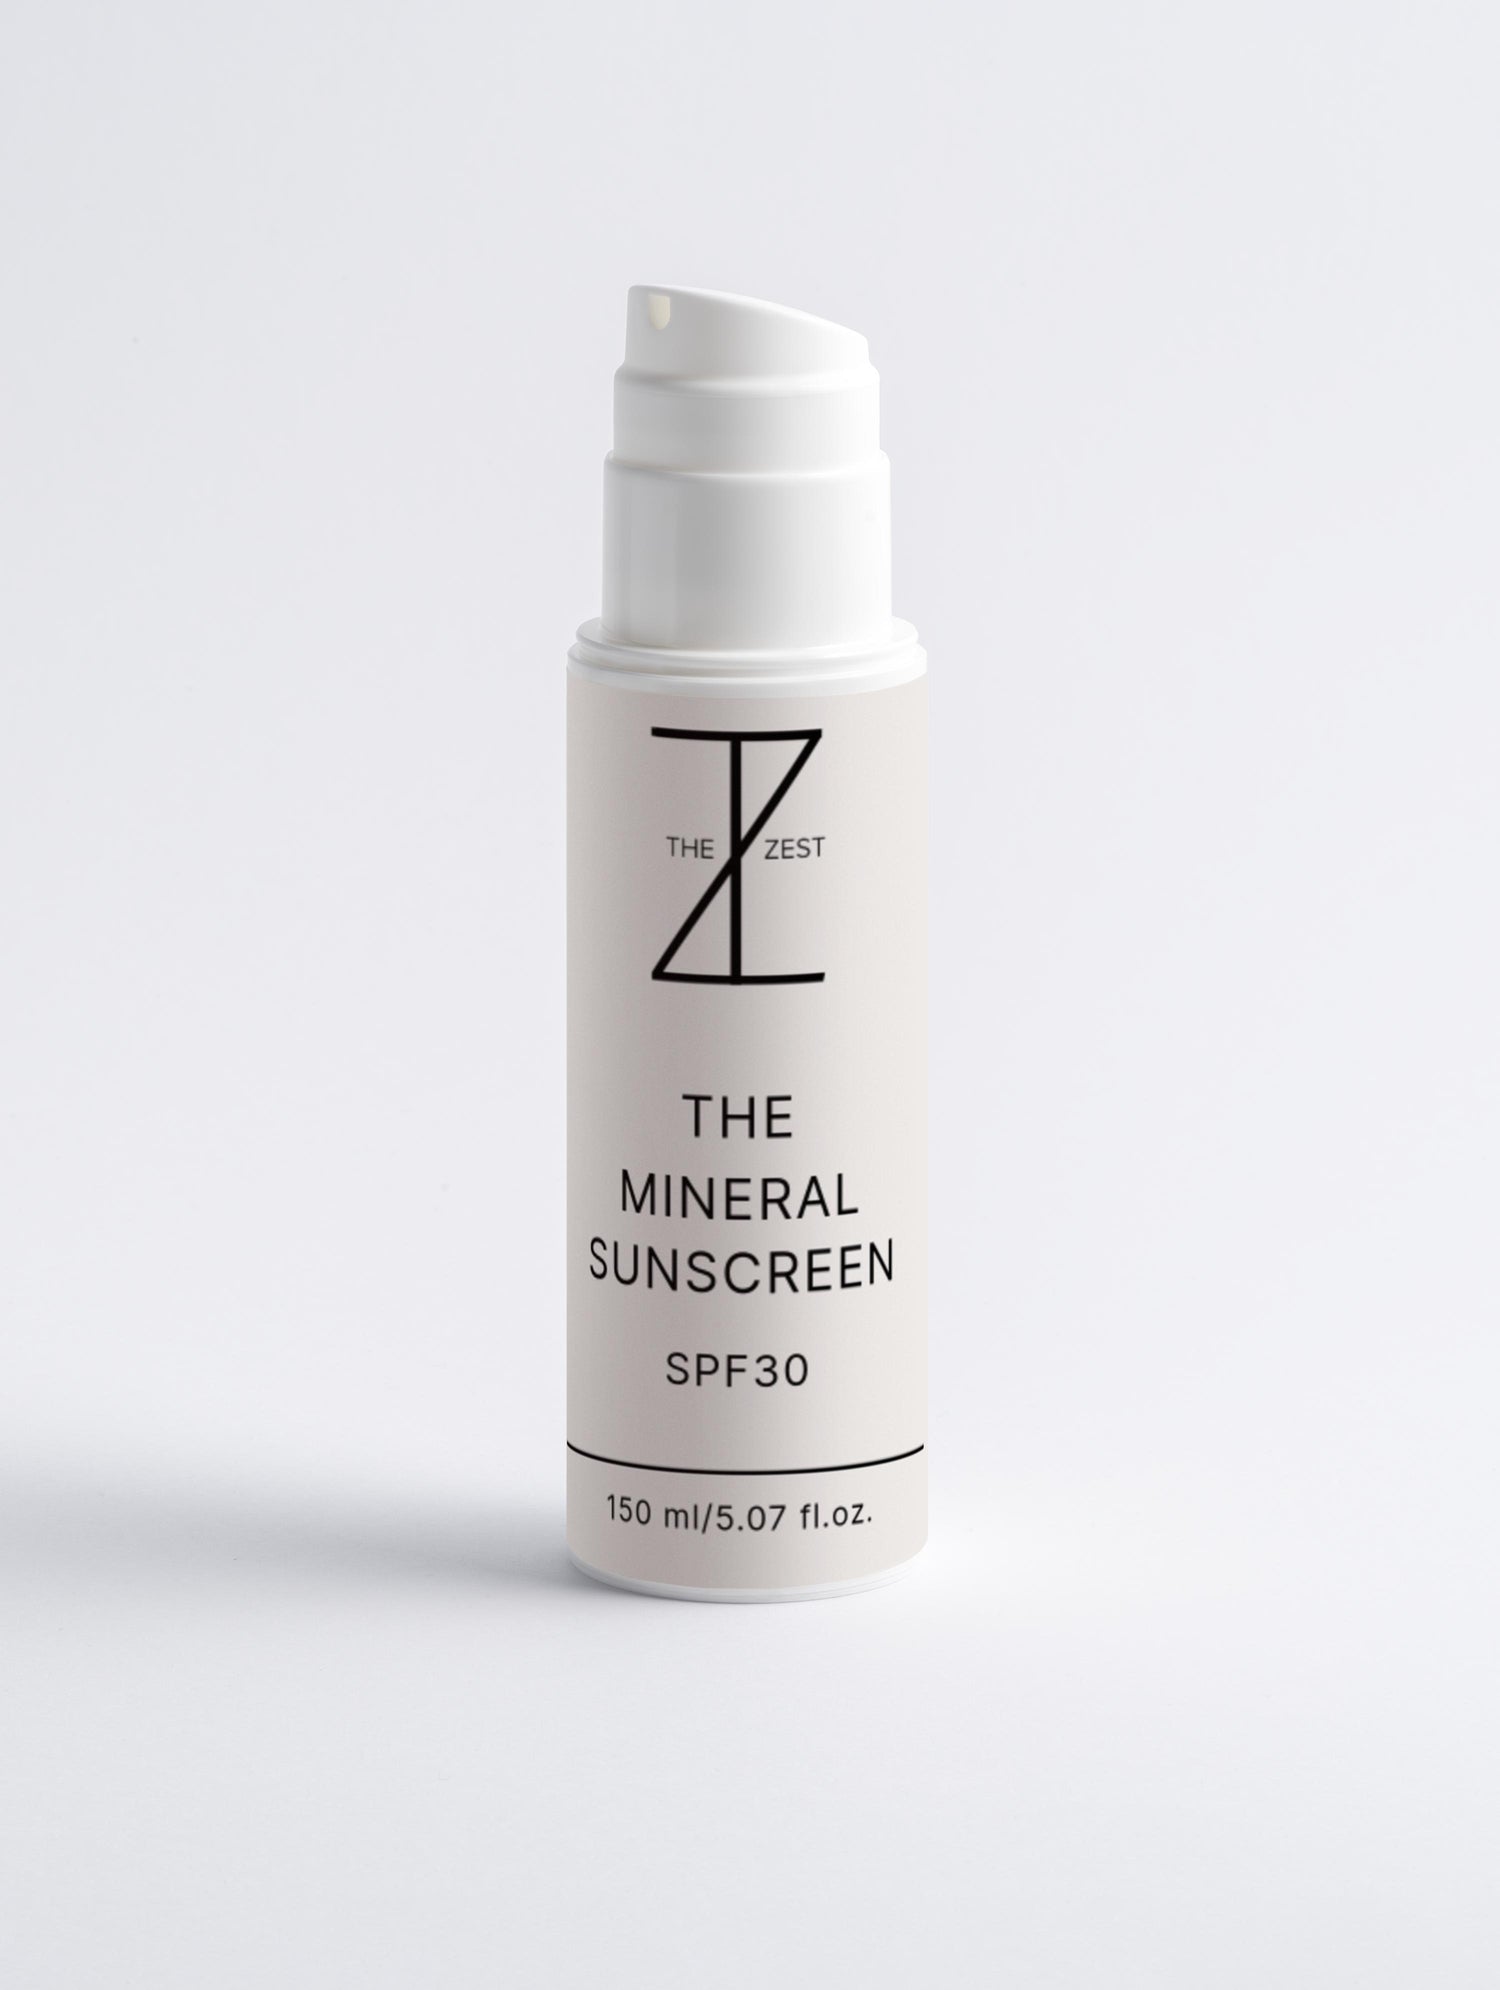 The Mineral Sunscreen SPF30